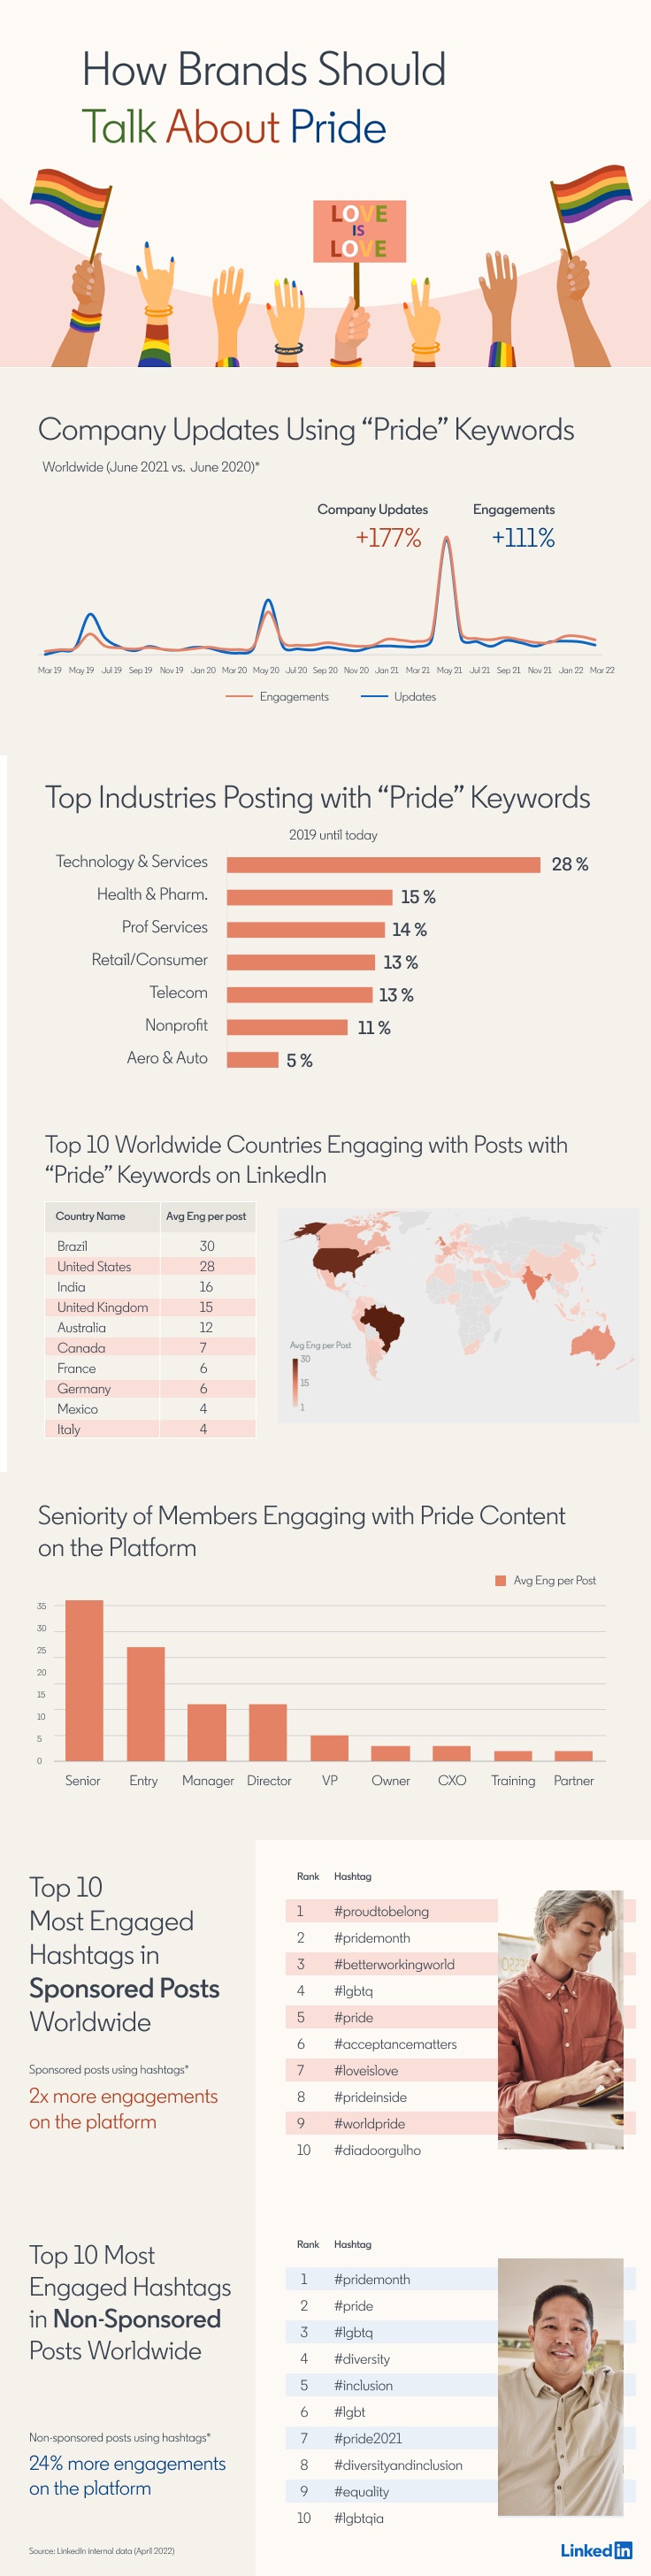 How brands should talk about pride on LinkedIn infographic